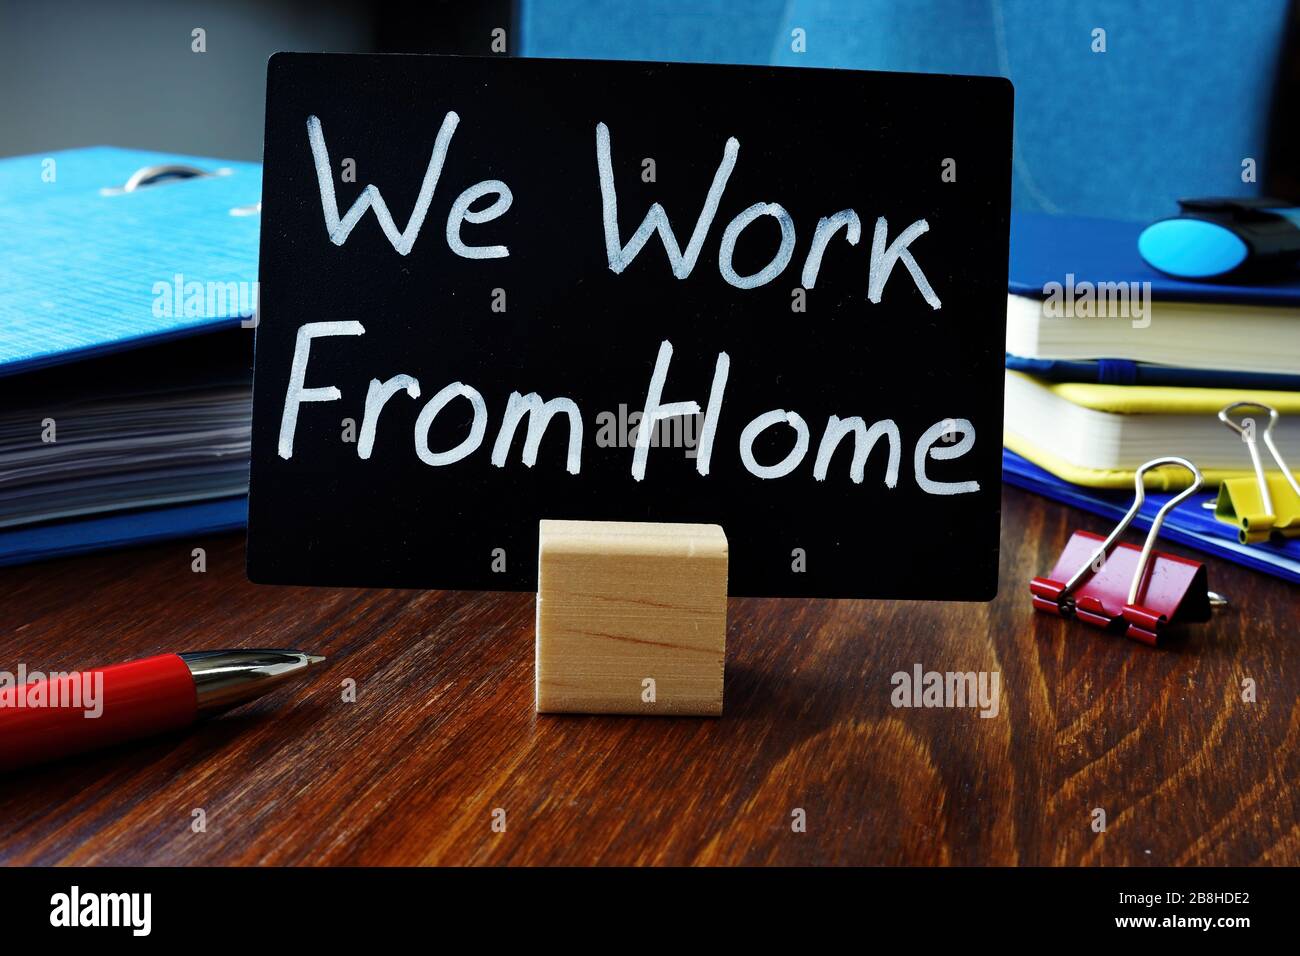 We work from home phase on the office table about remote job. Stock Photo